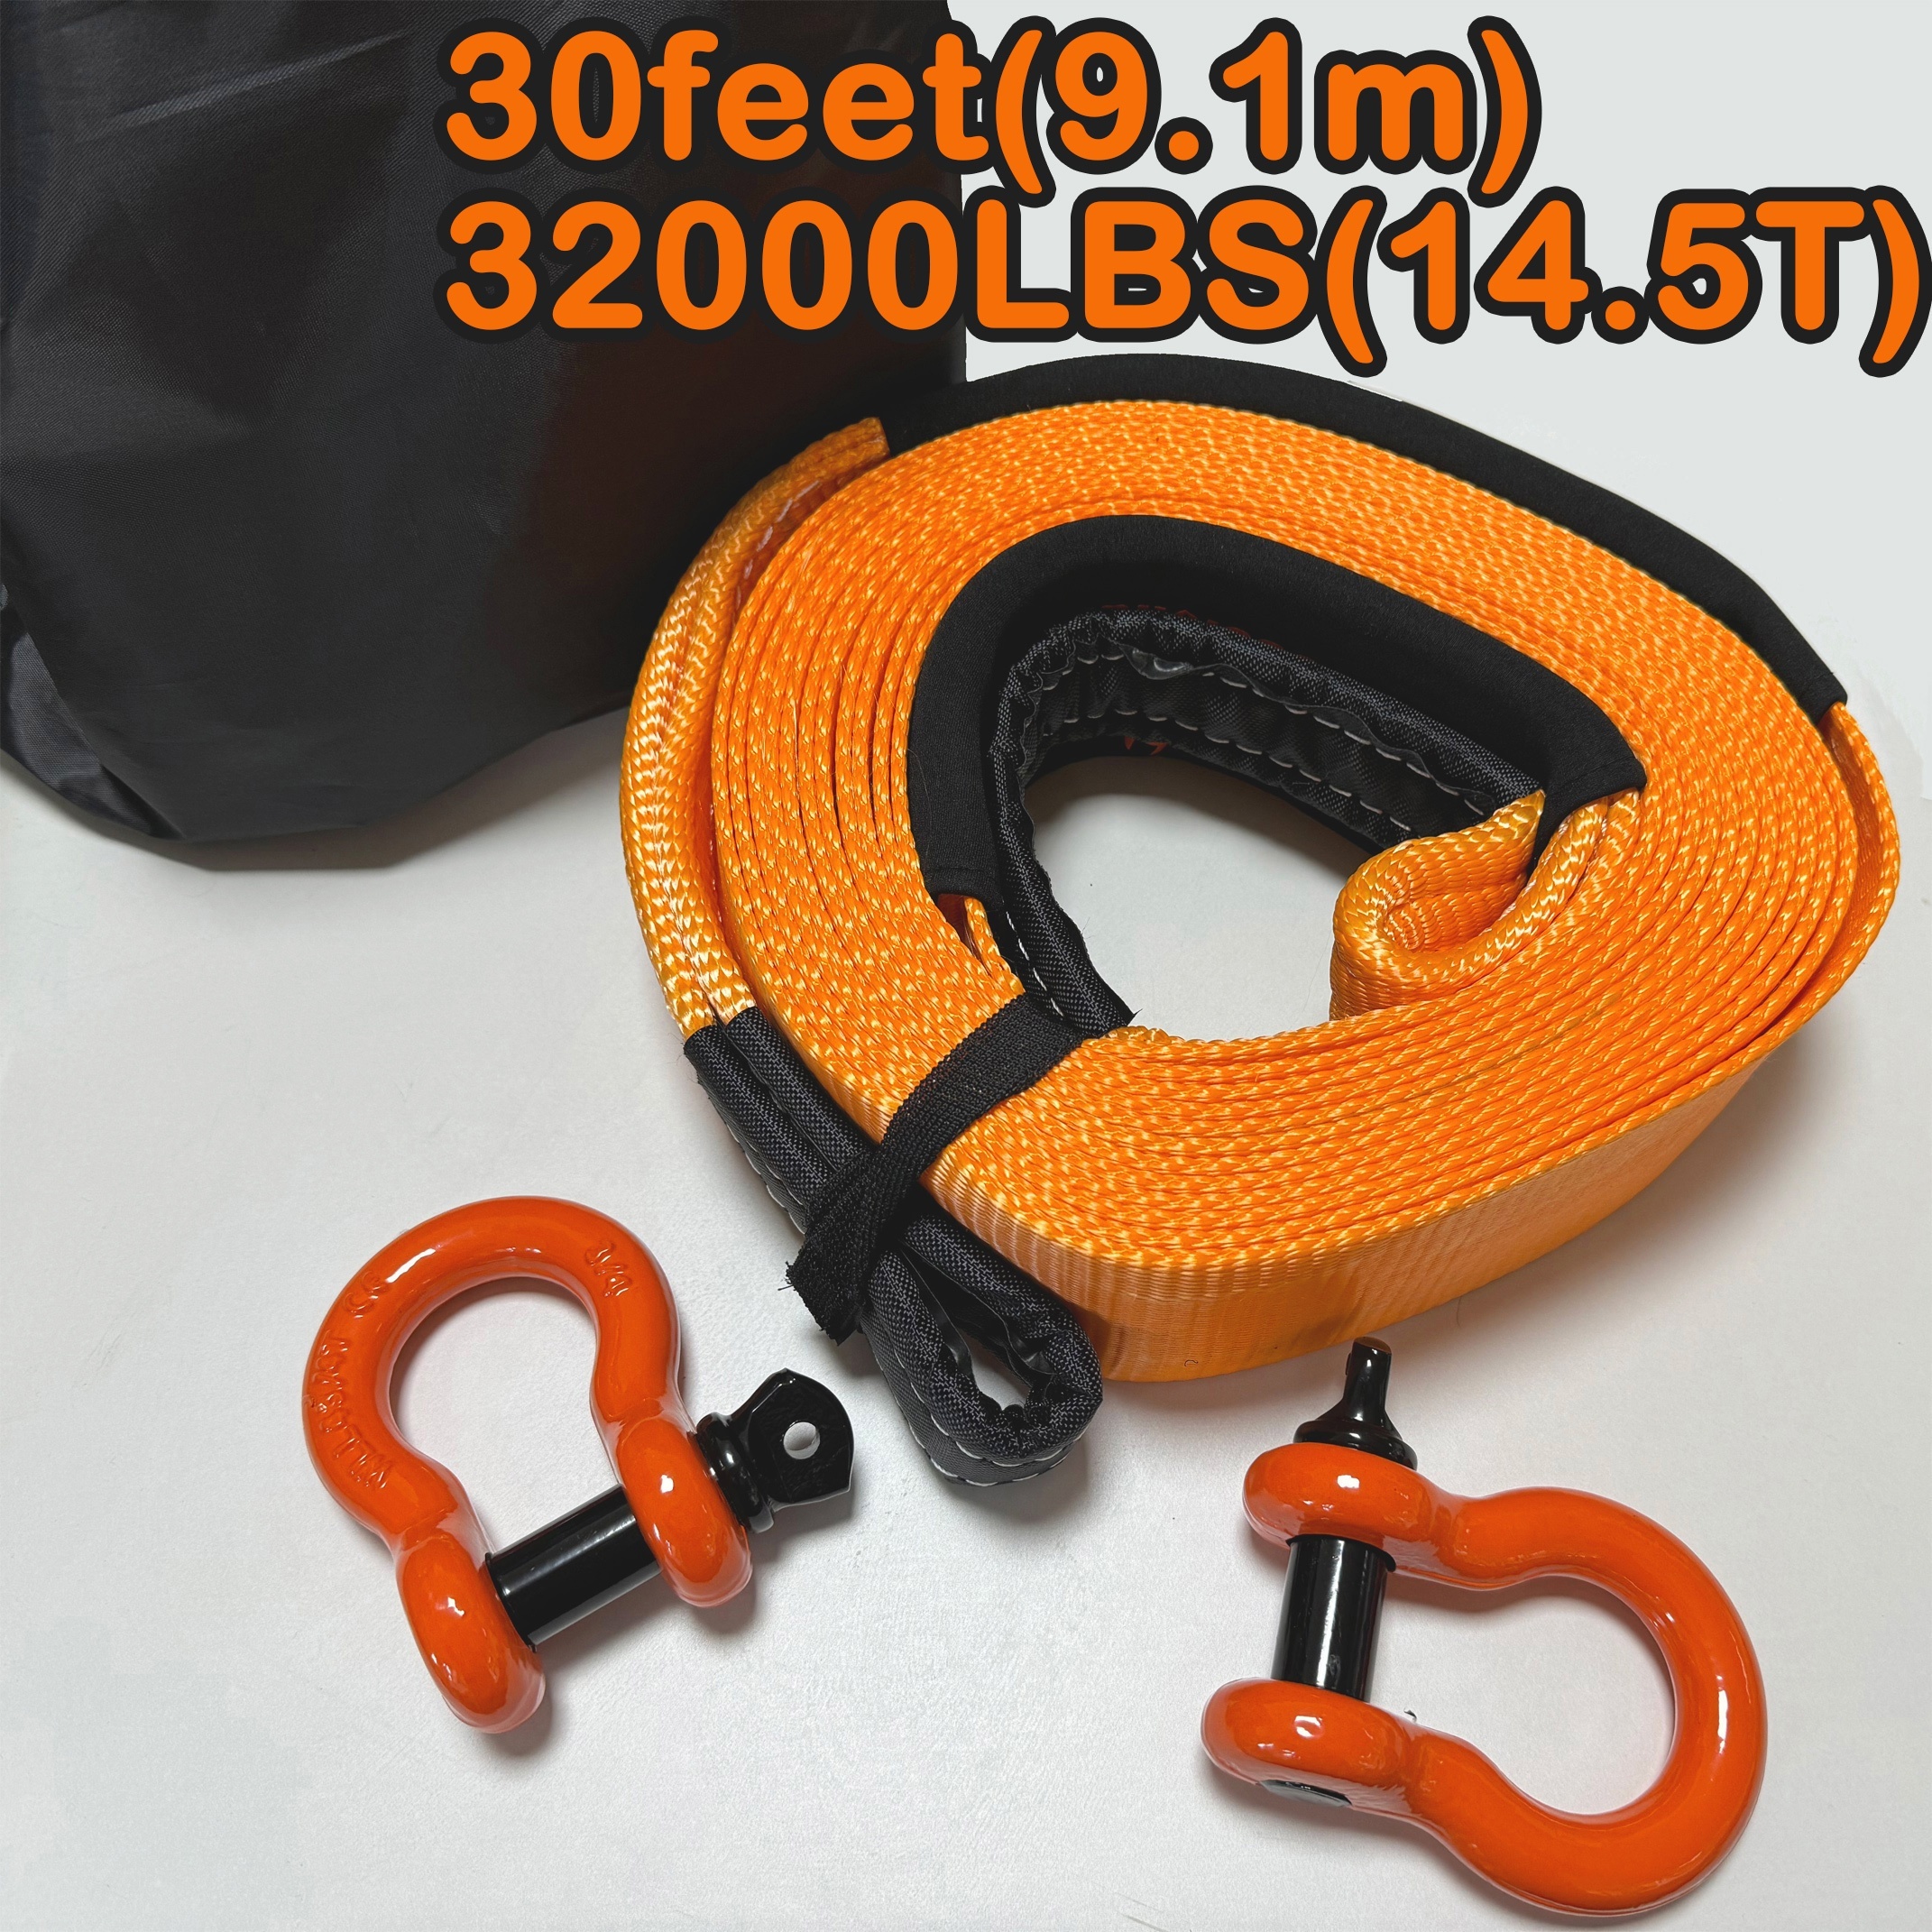 Heavy Duty Recovery Tow Rope Strap w/ Safety Hooks 13,000 Lb